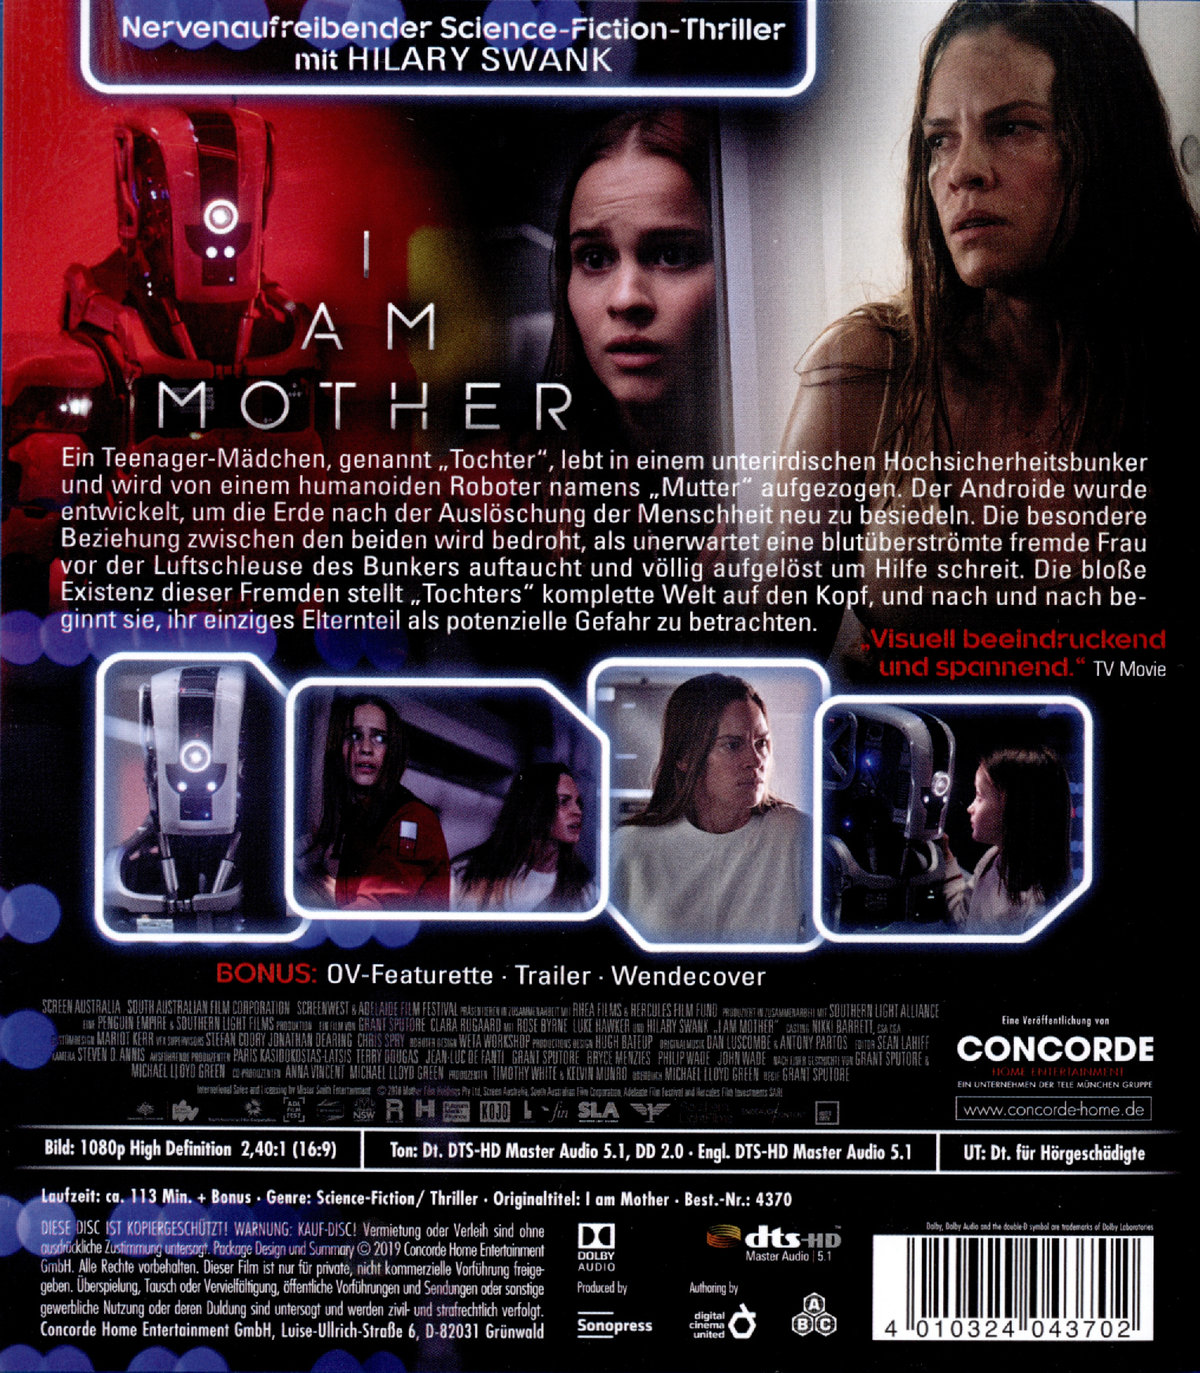 I Am Mother (blu-ray)